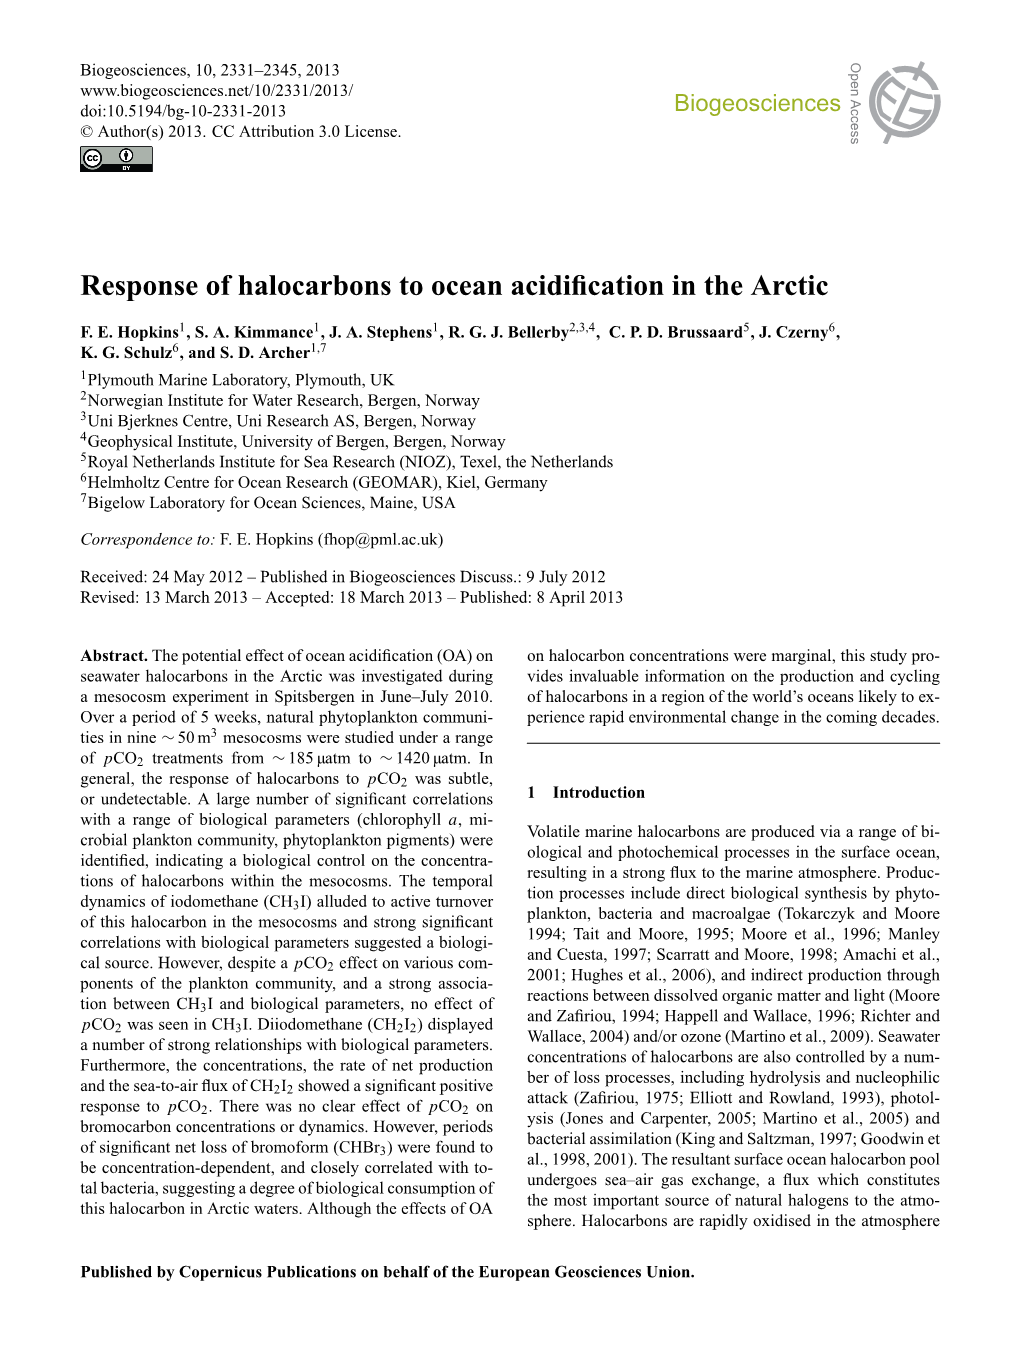 Response of Halocarbons to Ocean Acidification In